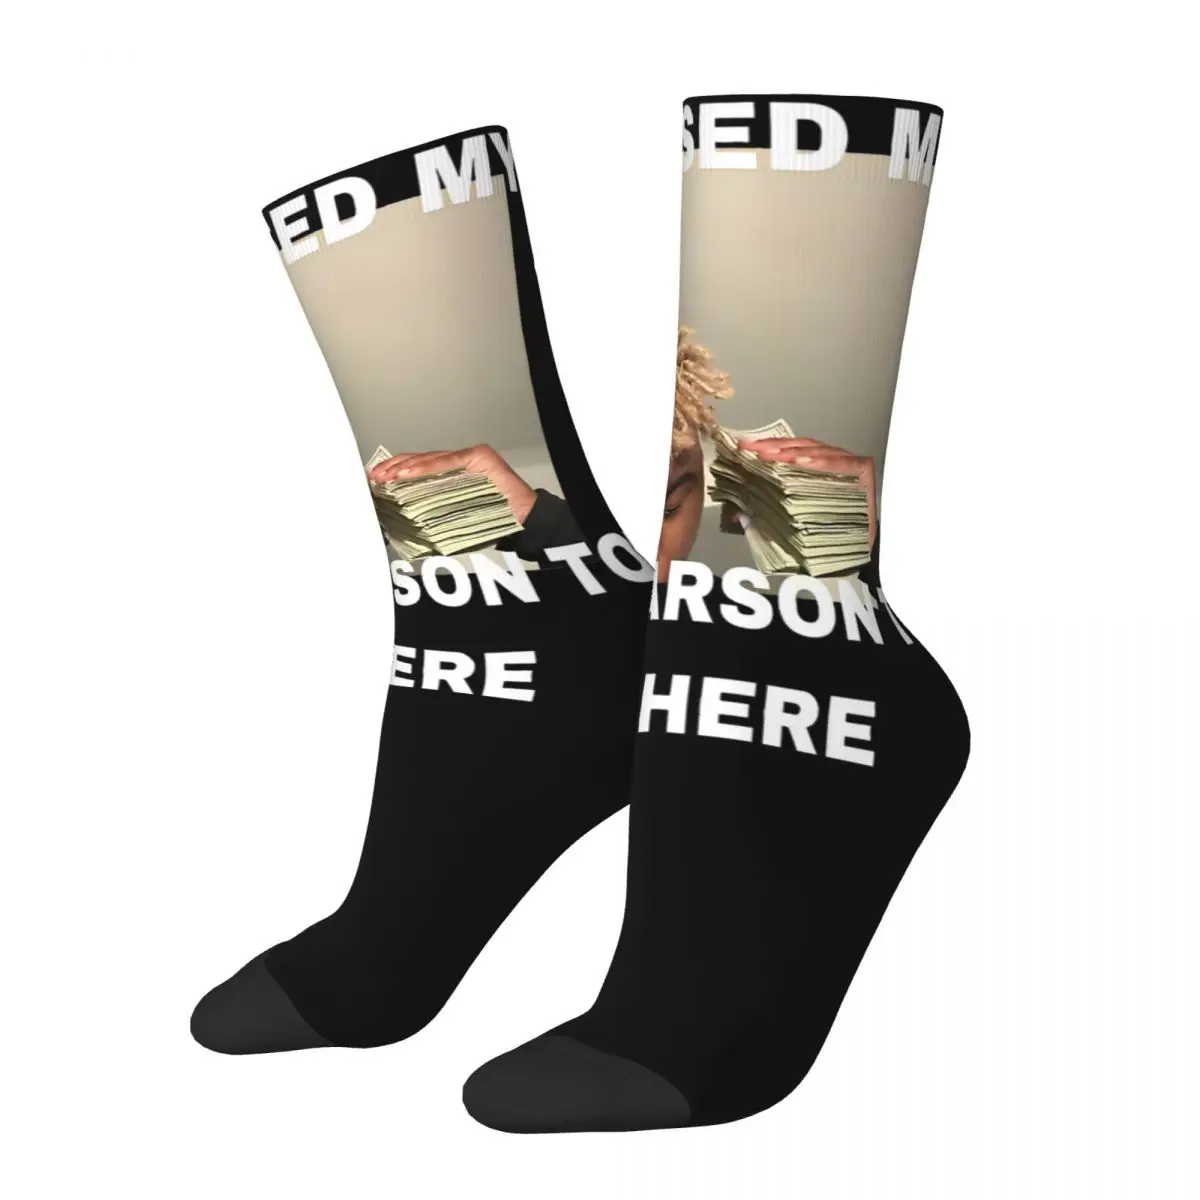 

I Paused My Ken Carson To Be Here Design Theme Crew Socks Accessories for Unisex Non-slip Sock